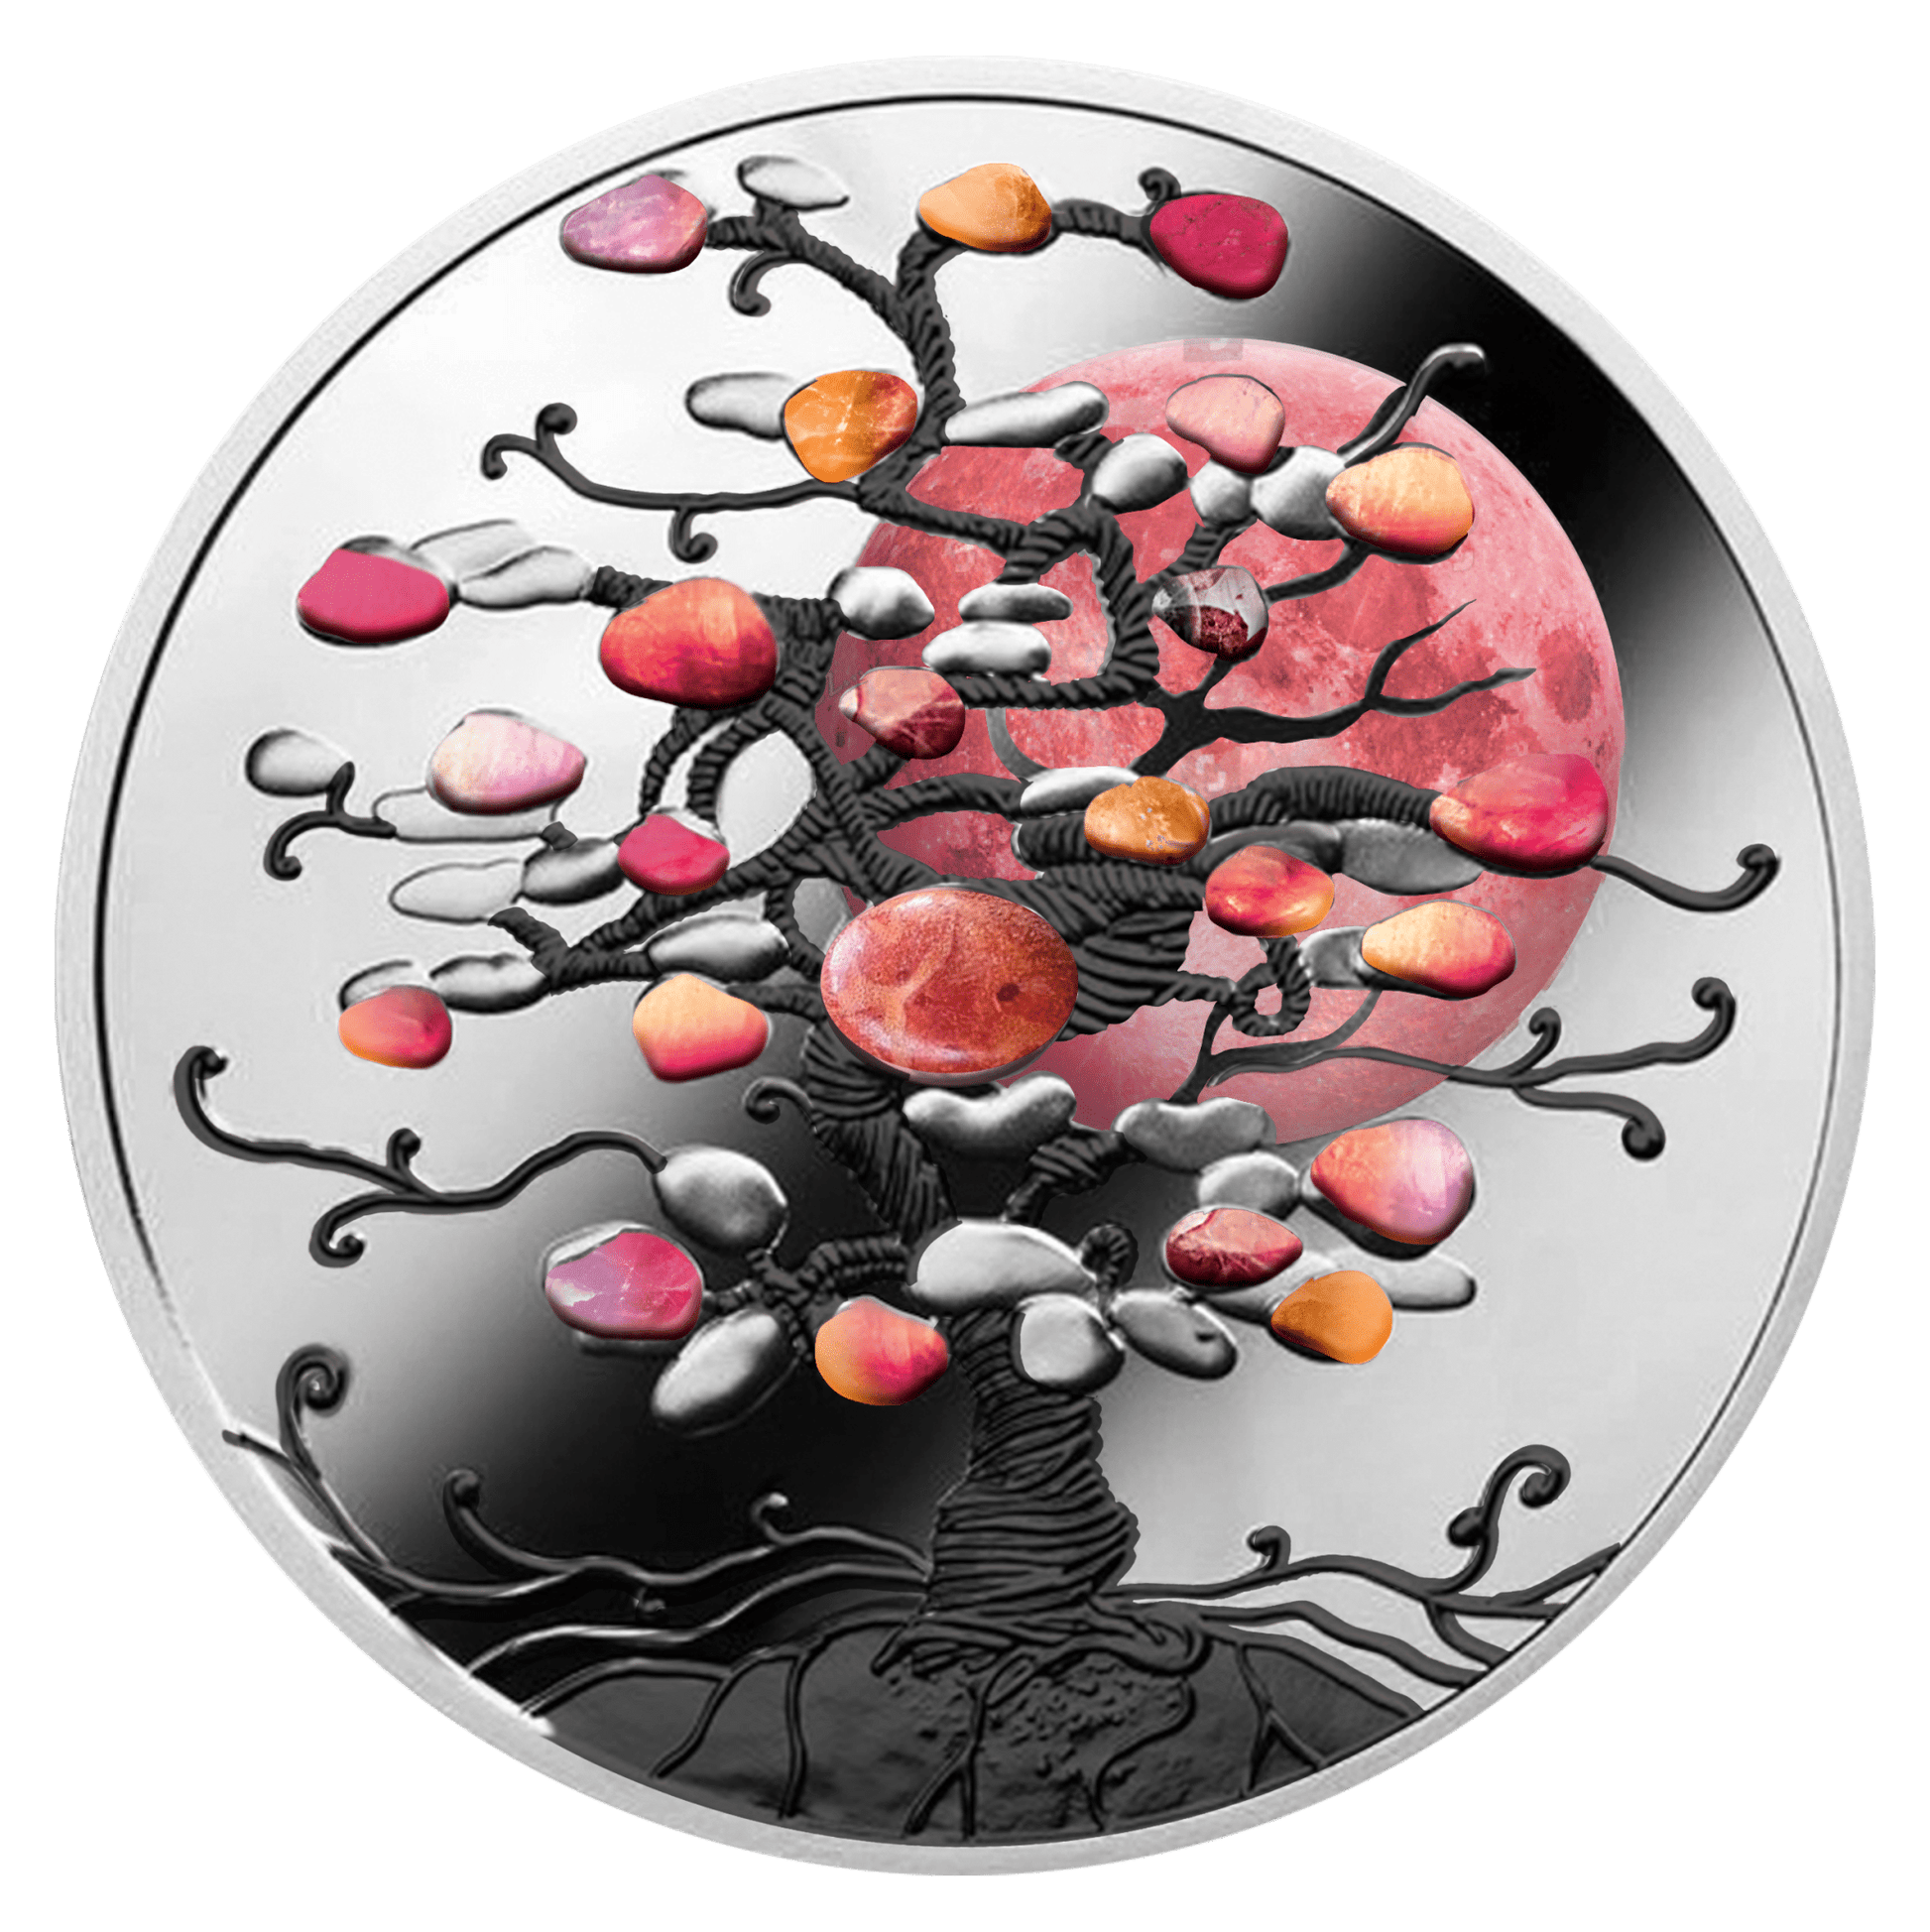 2022 Niue THE TREE OF LUCK CORAL 1 oz Silver Coin PF 70 - OZB